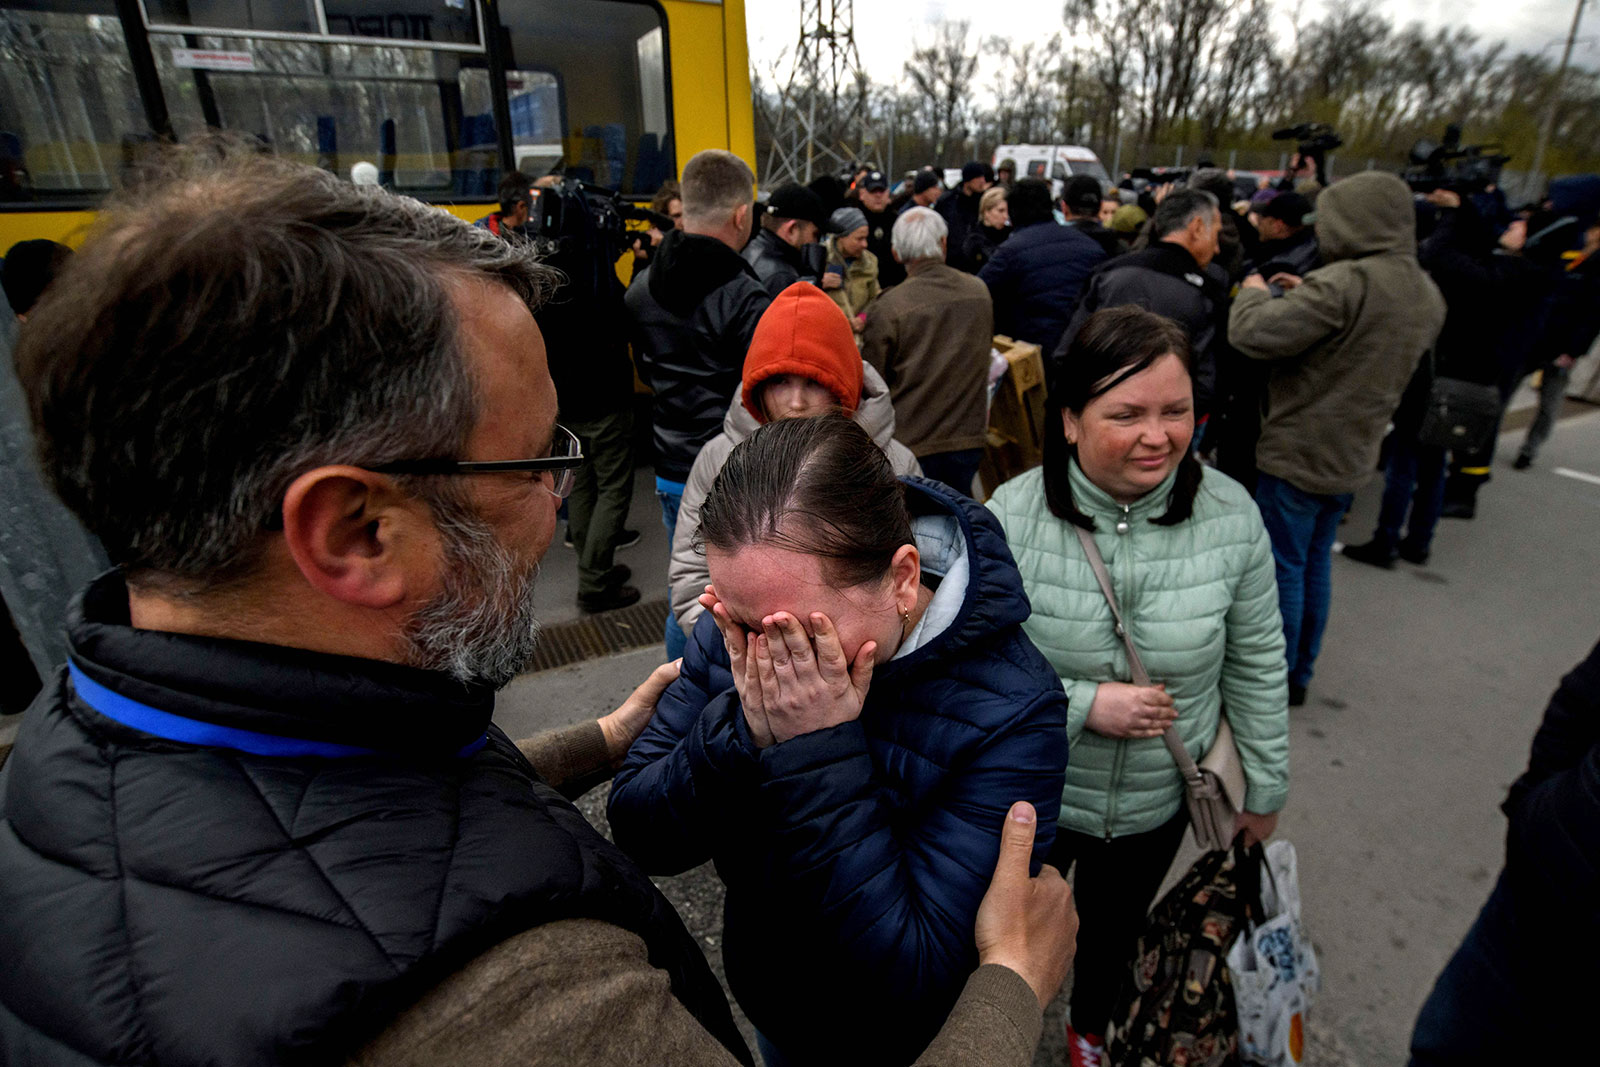 People fleeing fighting in Mariupol meet with relatives and friends as they arrive at a registration center for internally displaced people in Zaporizhzhia on April 21. They were part of a small convoy that was able to evacuate and cross through territory held by Russian forces.